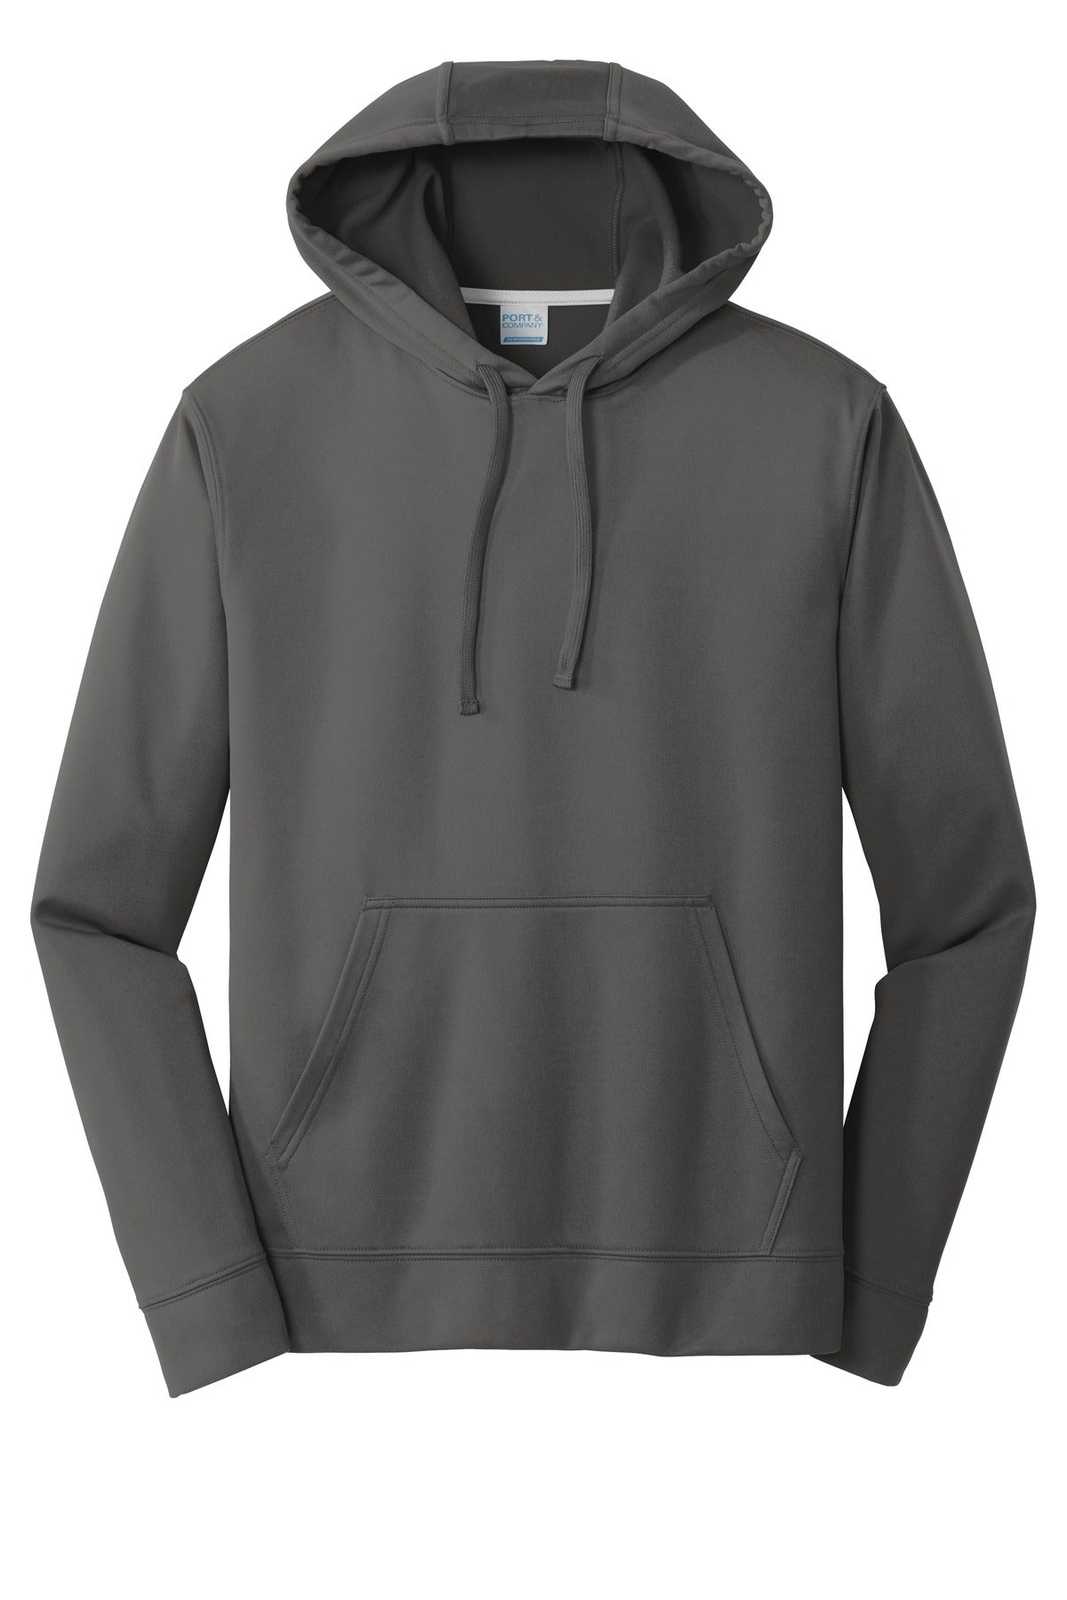 Port &amp; Company PC590H Performance Fleece Pullover Hooded Sweatshirt - Charcoal - HIT a Double - 5